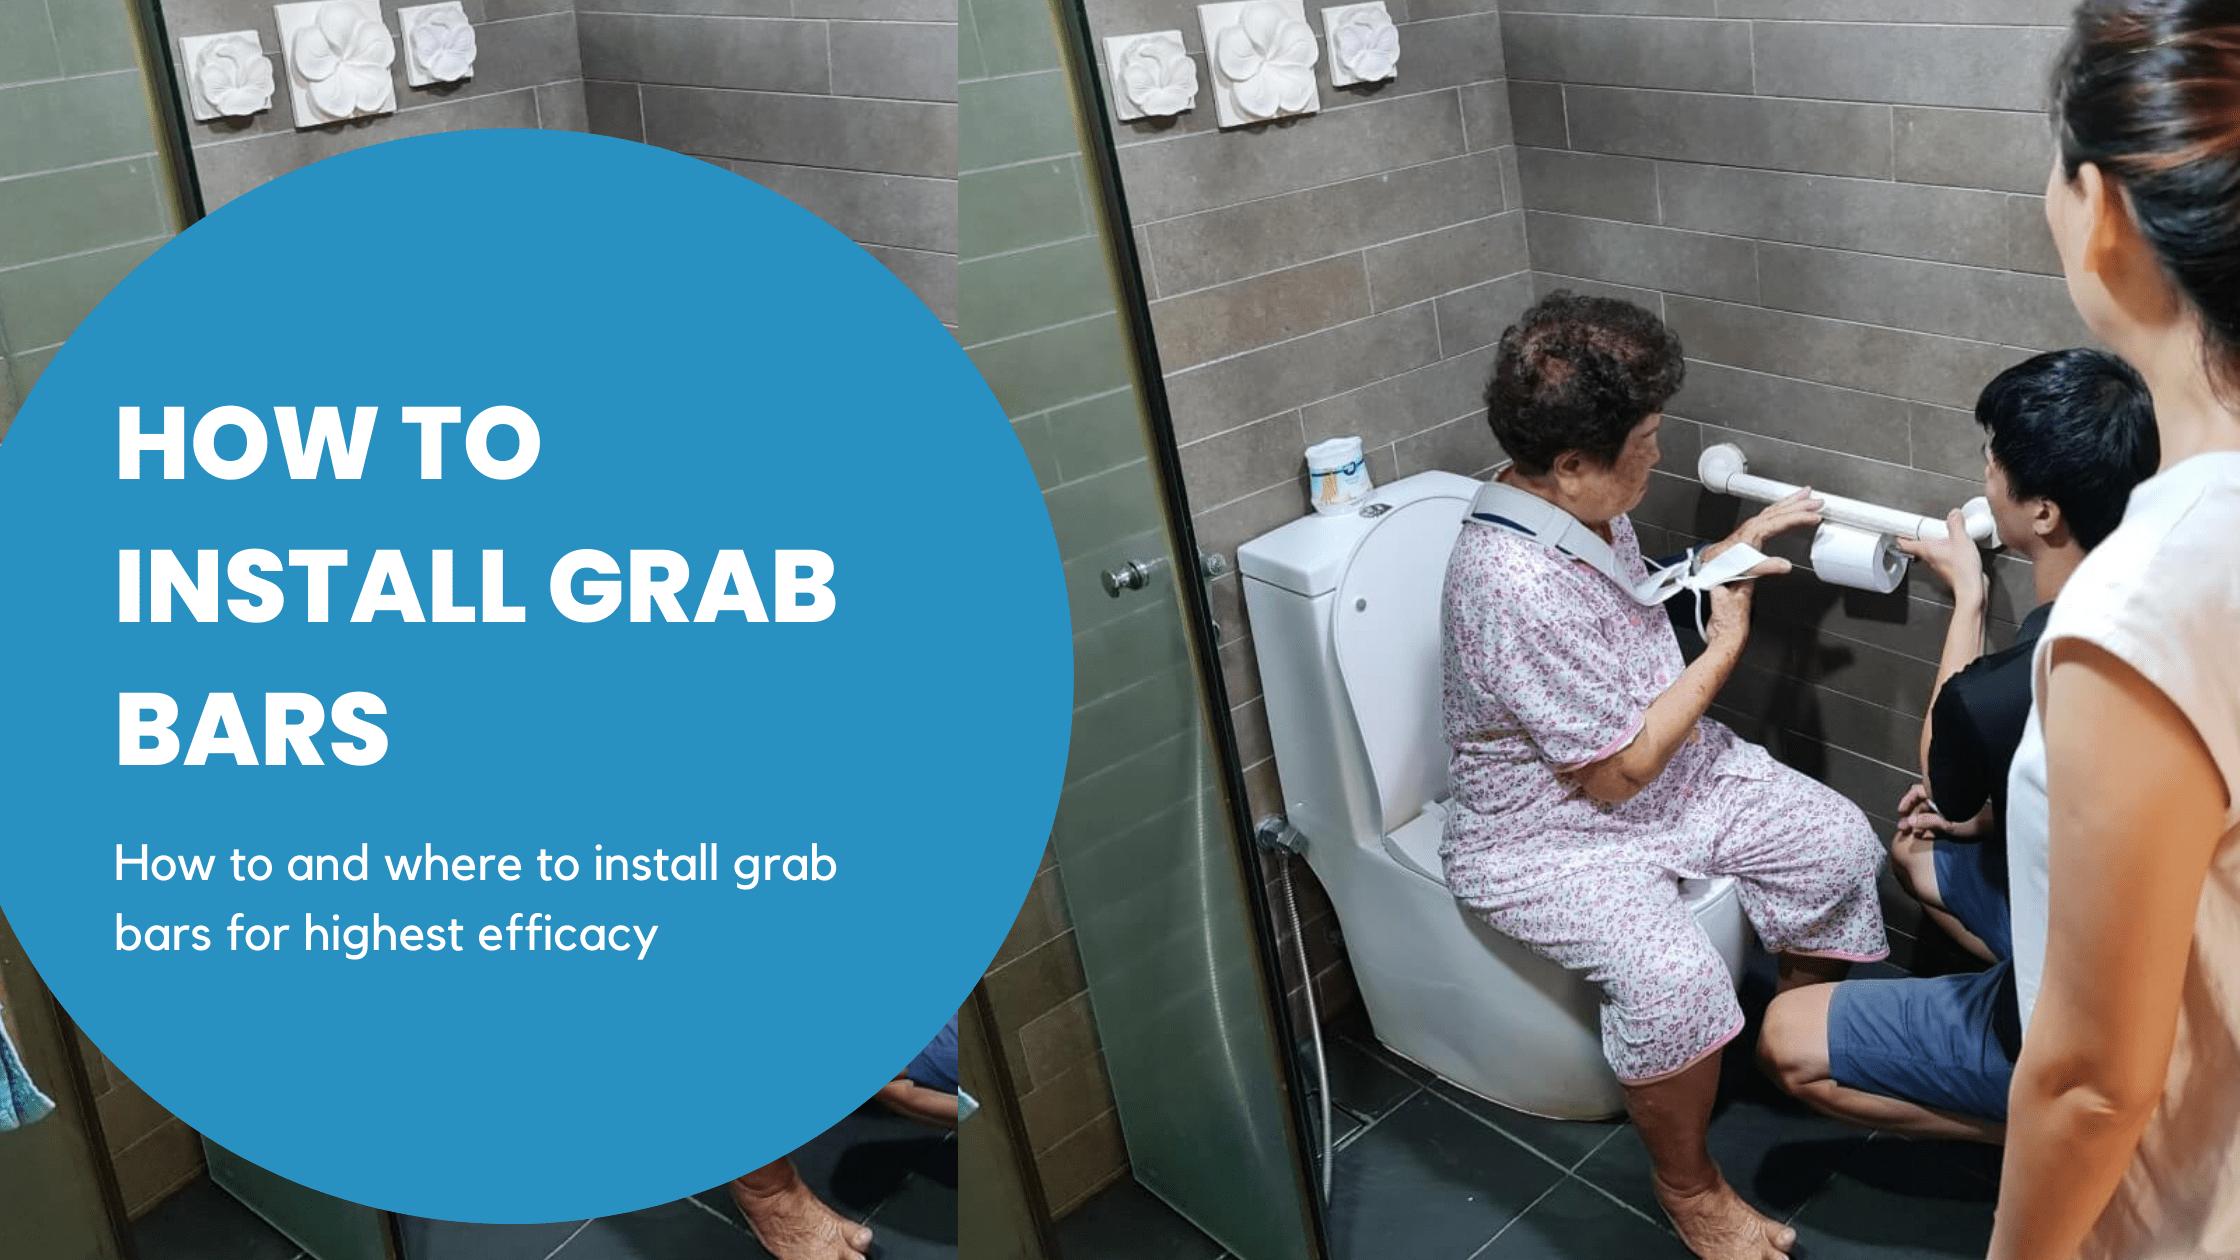 How to install grab bars